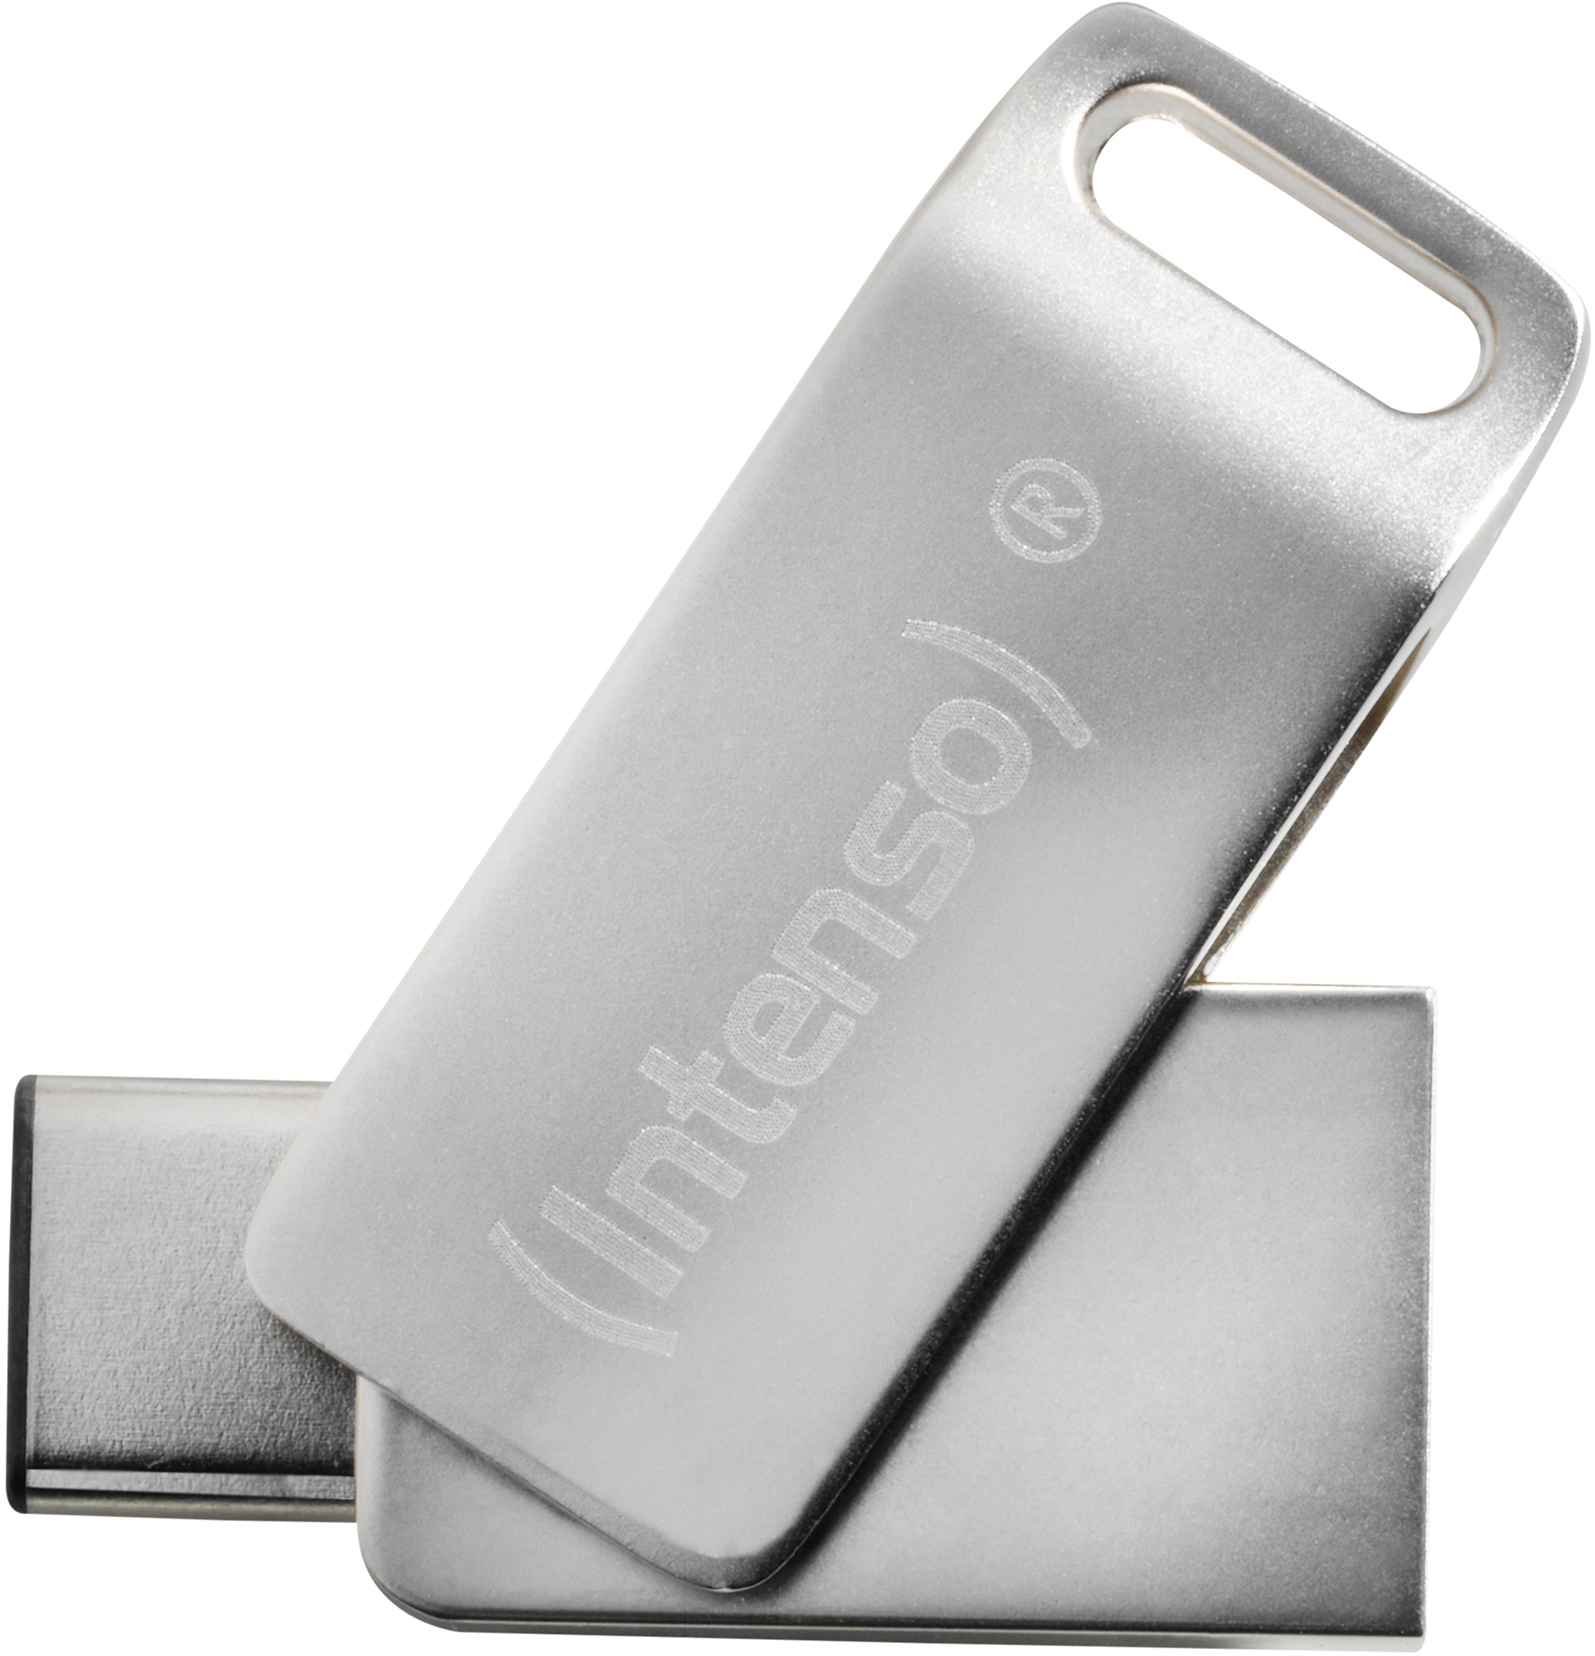 INTENSO CMOBILE LINE USB-Stick, Silber 70 GB, 32 MB/s